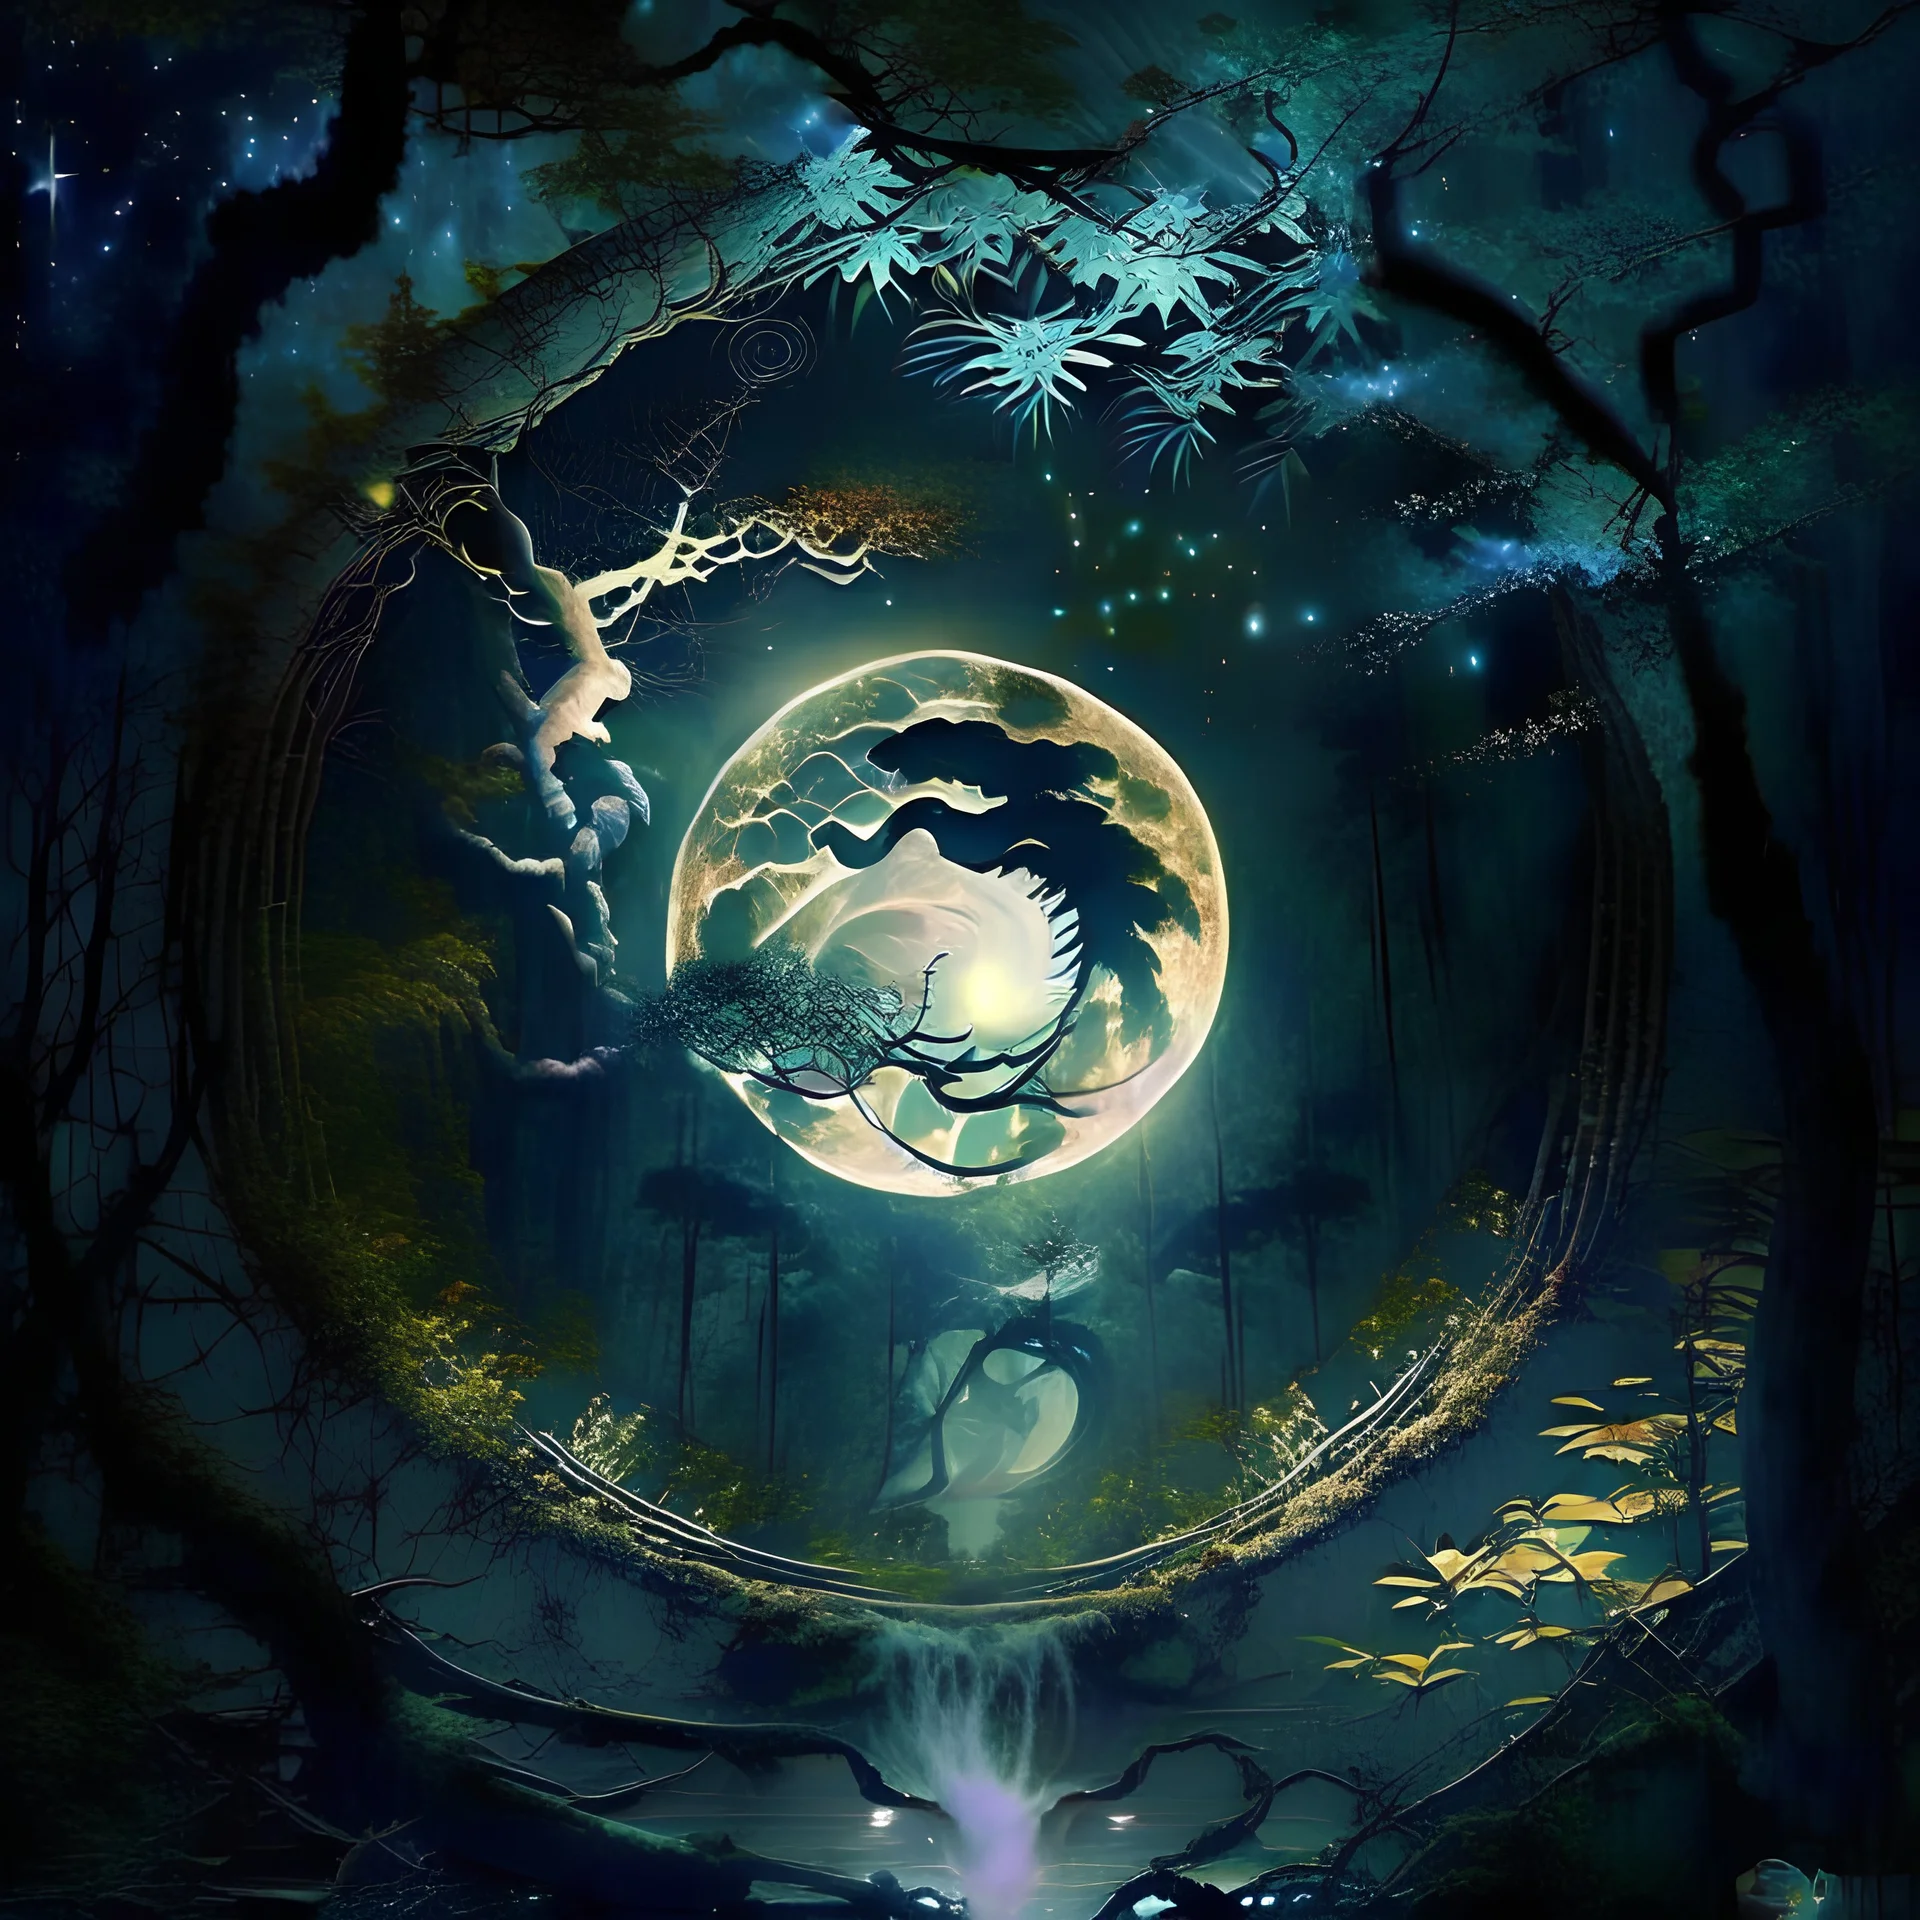 Create a hurricane of divine light, like a miracle in a Full moon night in a chinese forest, add infinite to the imagine